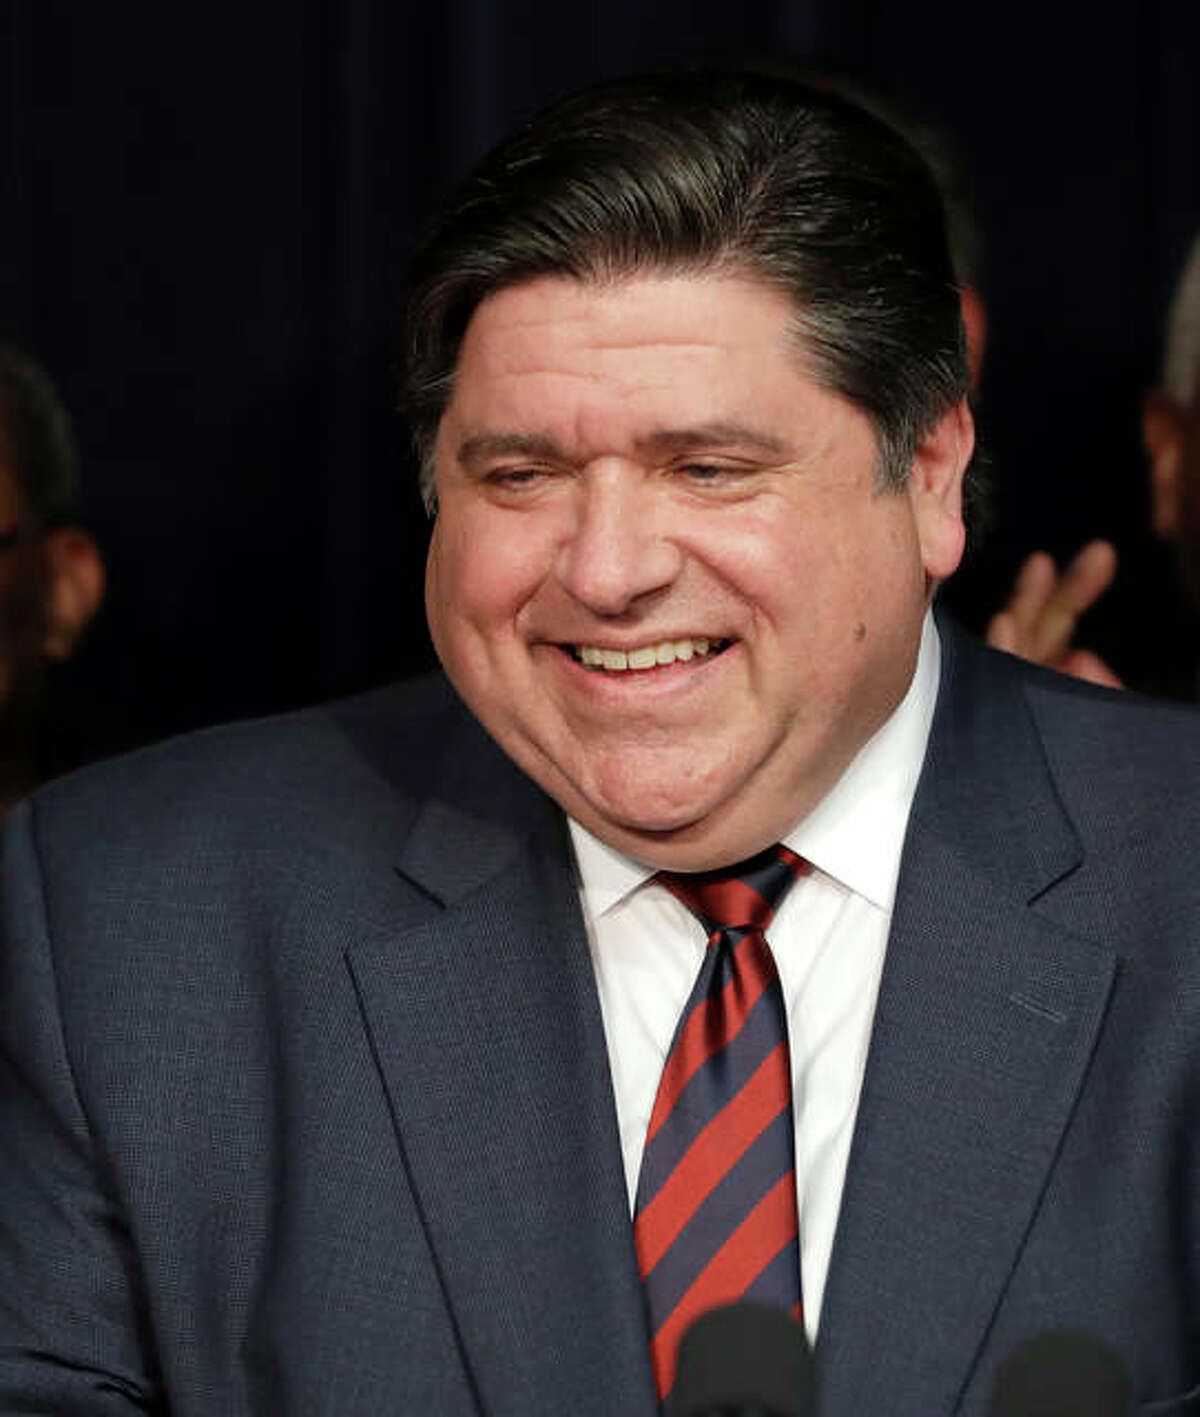 Illinois lawmakers took a sharp turn to the left during the just-completed legislative session, passing a budget with more than $1 billion in new spending and a host of new, more liberal social policies — with rookie Gov. JB Pritzker at the helm.